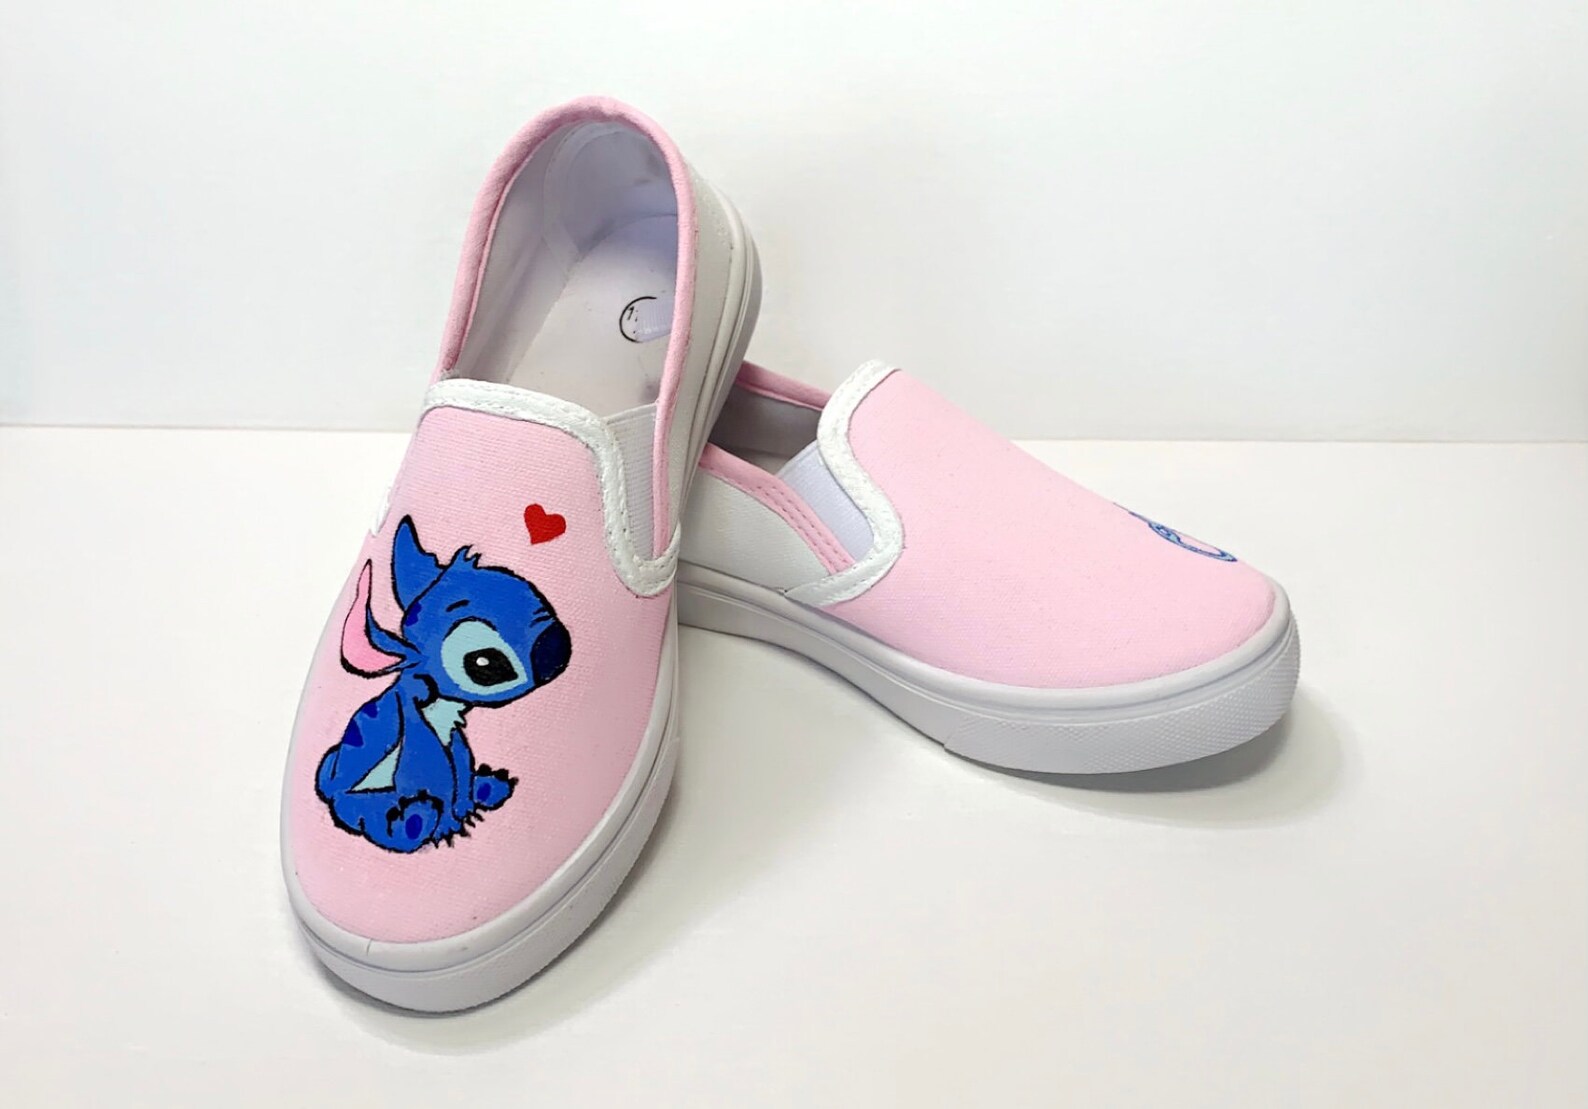 Stitch Hand Painted Canvas Shoes Kids - Etsy